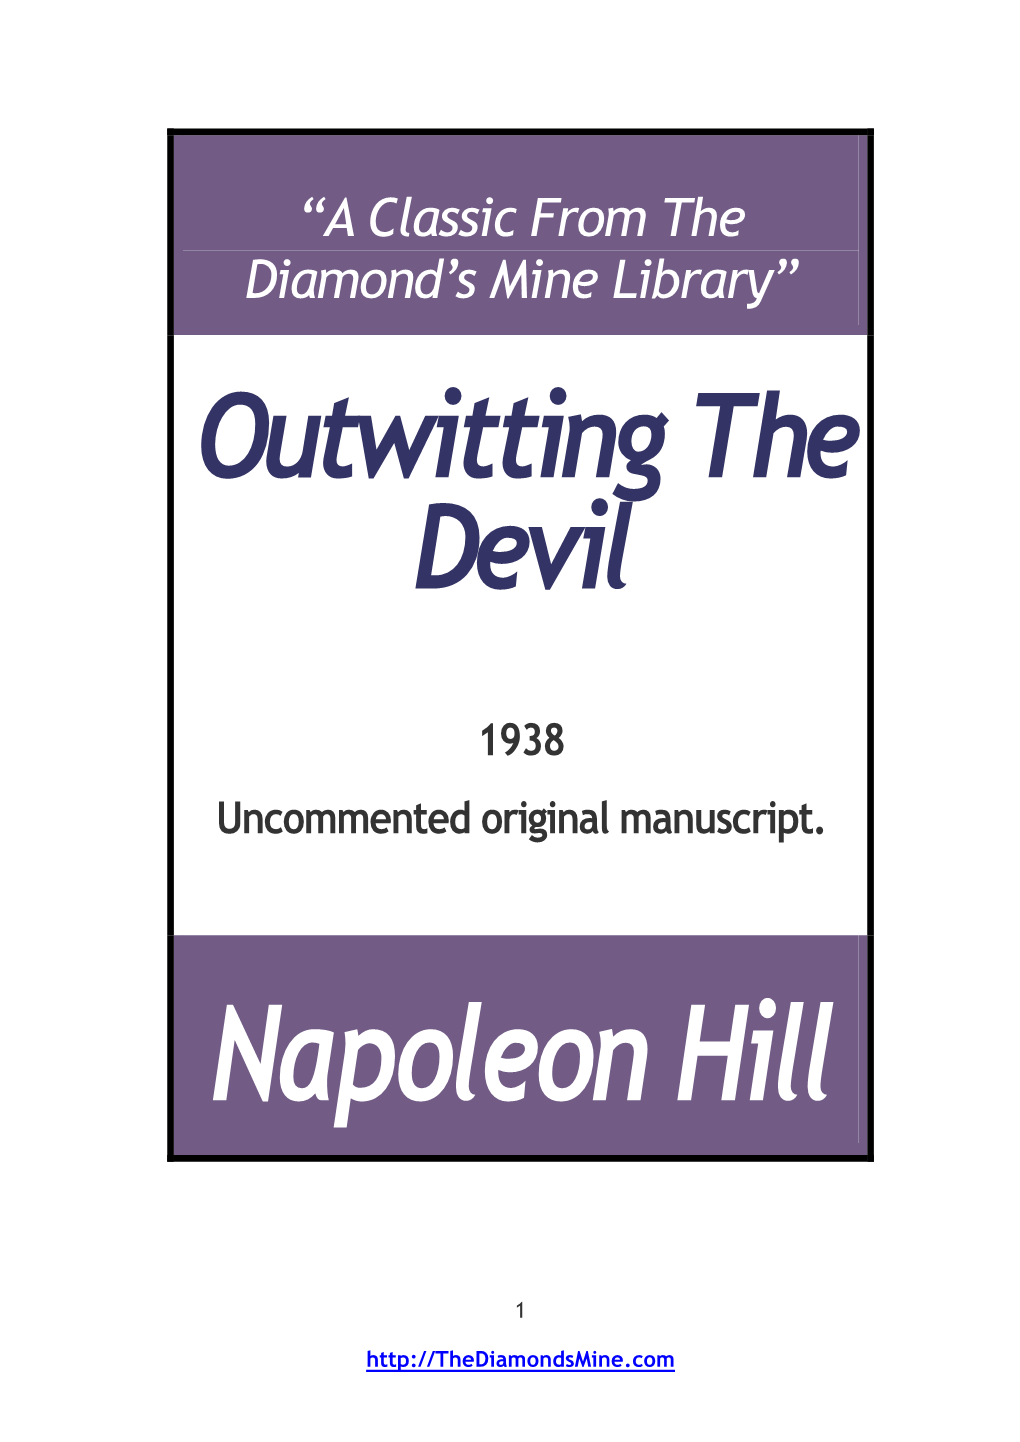 Outwitting the Devil – 1938